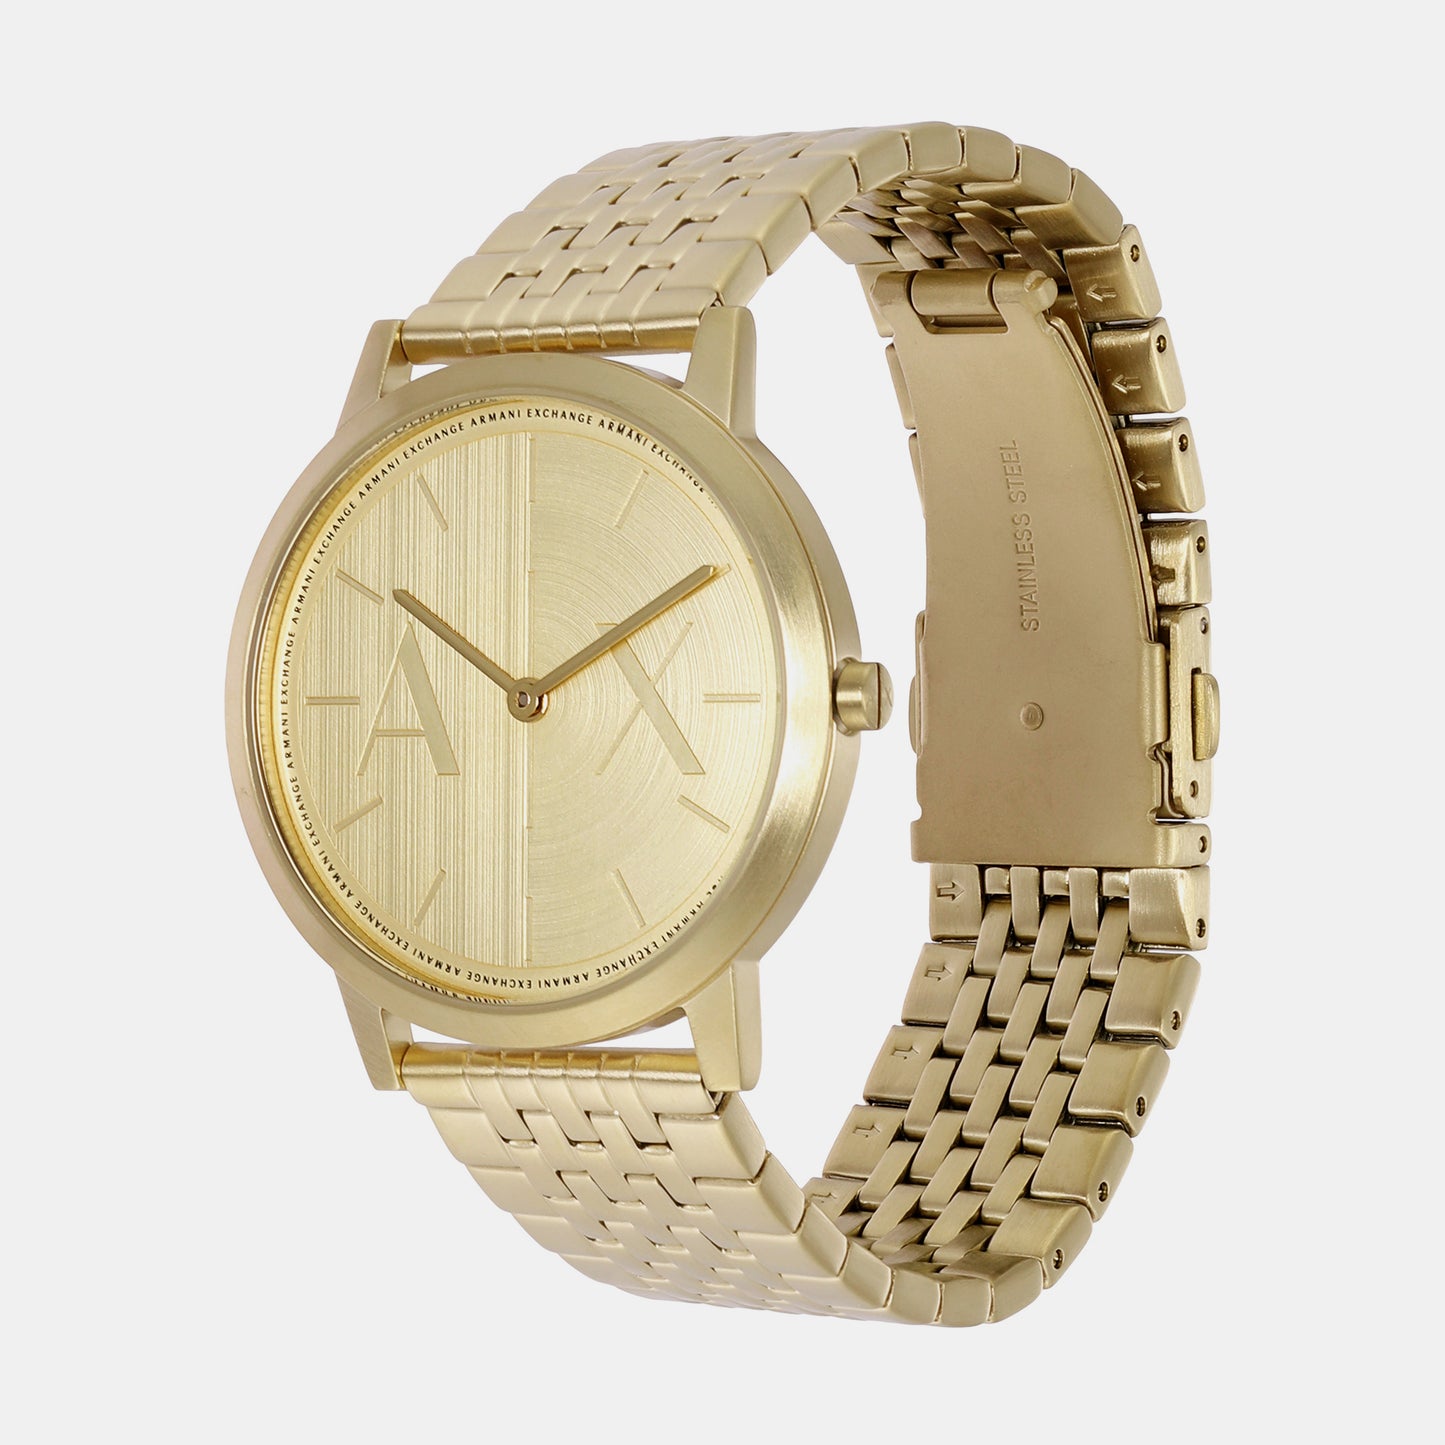 Male Gold Analog Stainless Steel Watch AX2871